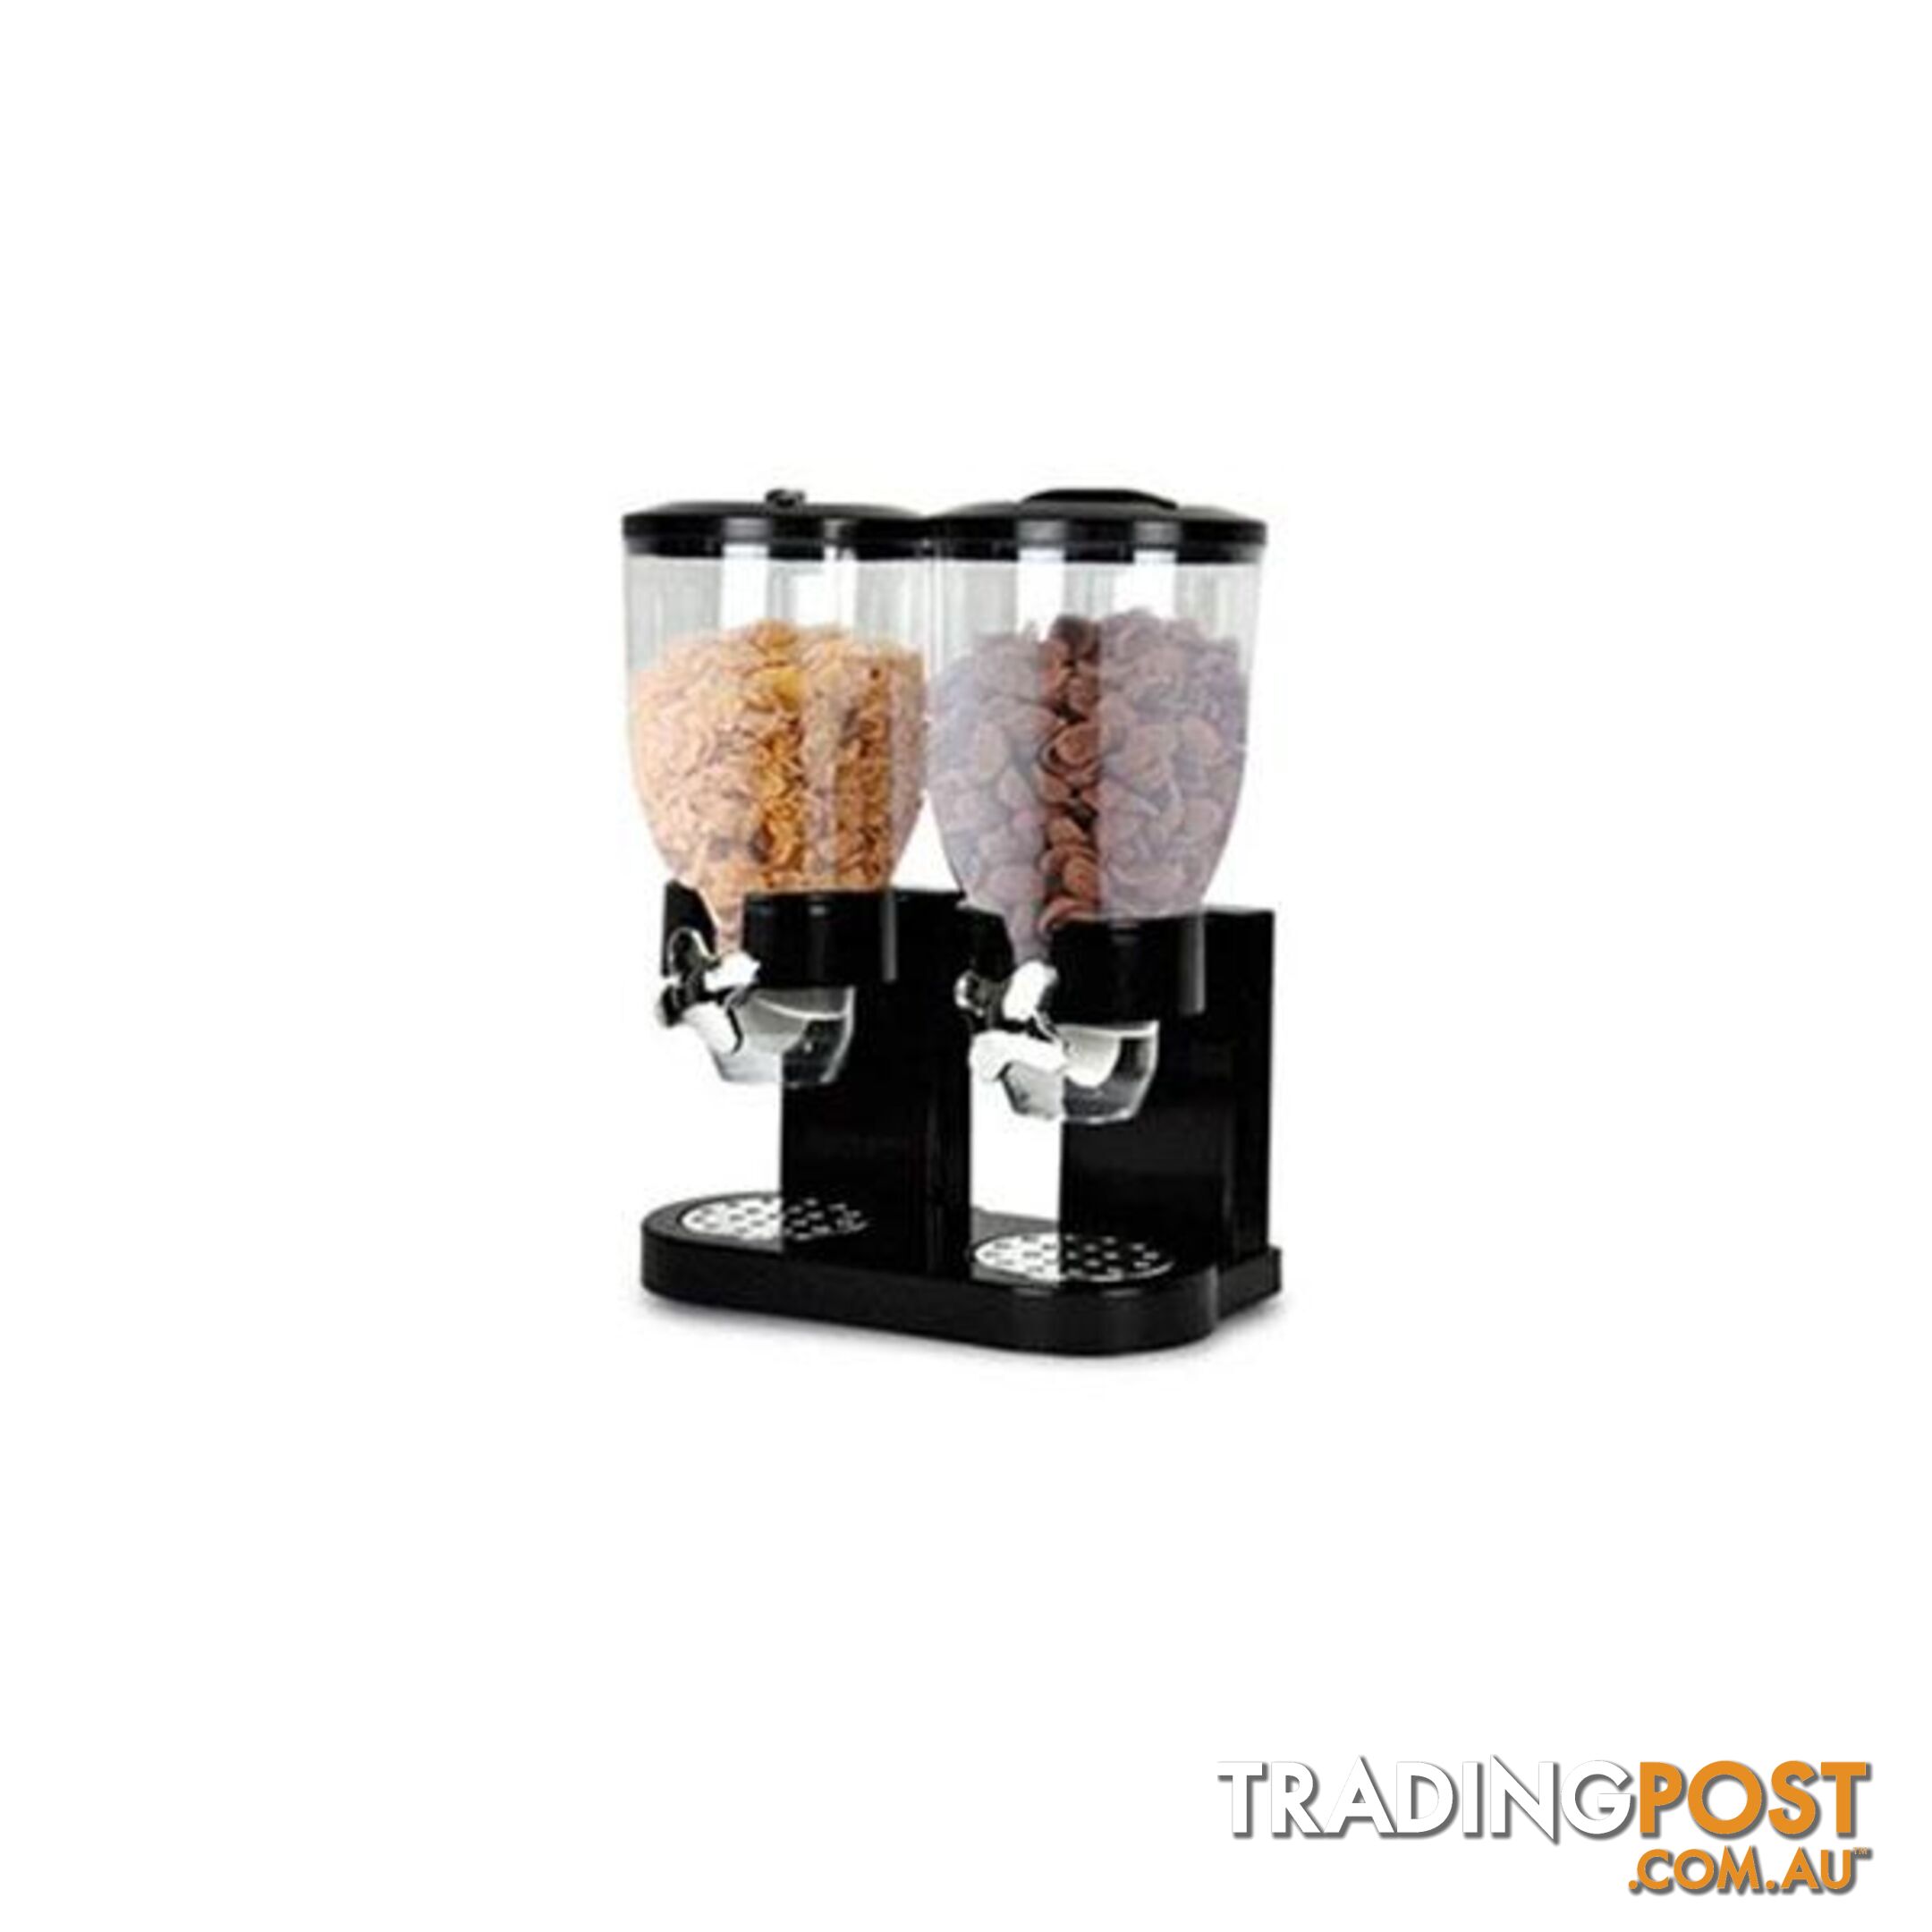 Double Cereal Dispenser Dry Food Storage Container Black - Dry Food Storage Container - 7427005881978